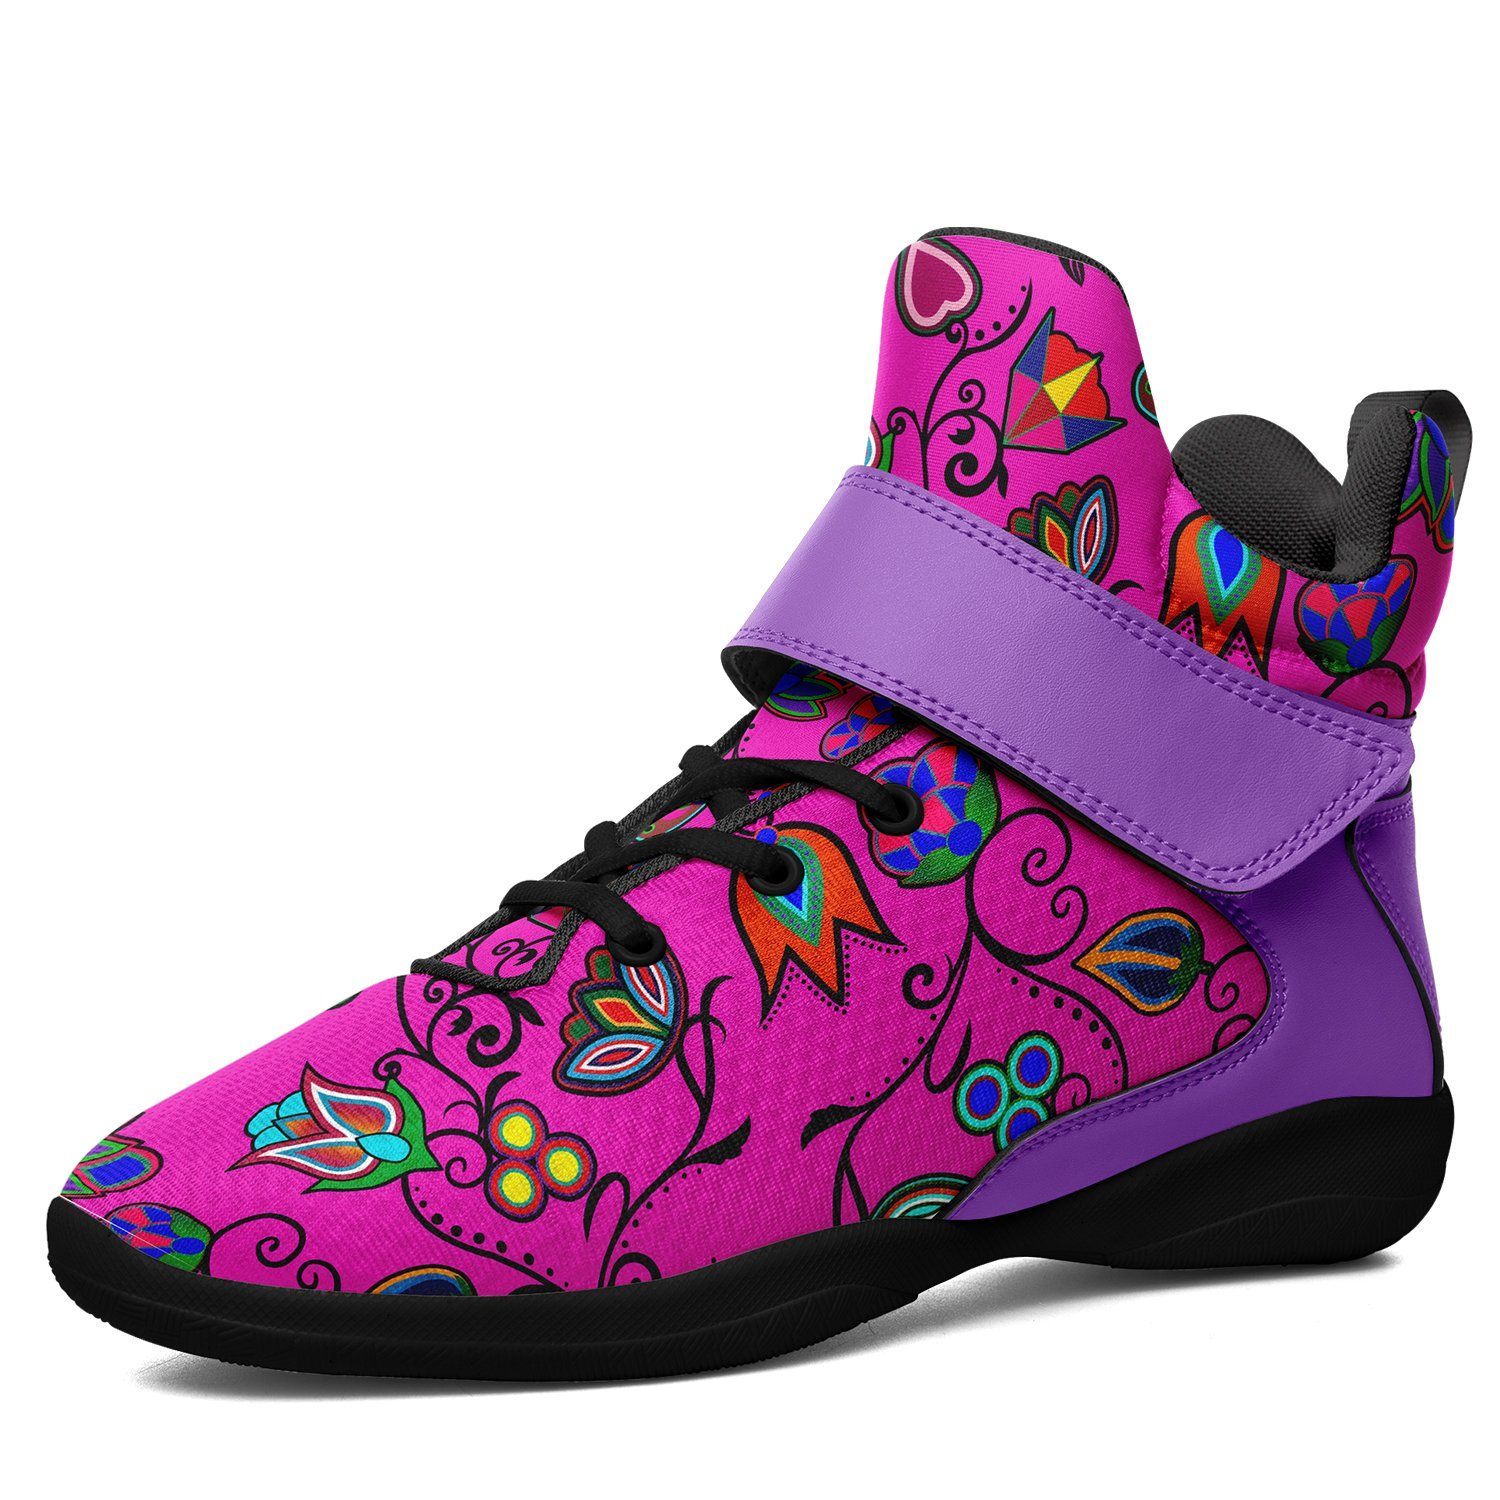 Indigenous Paisley Kid's Ipottaa Basketball / Sport High Top Shoes 49 Dzine US Child 12.5 / EUR 30 Black Sole with Lavender Strap 